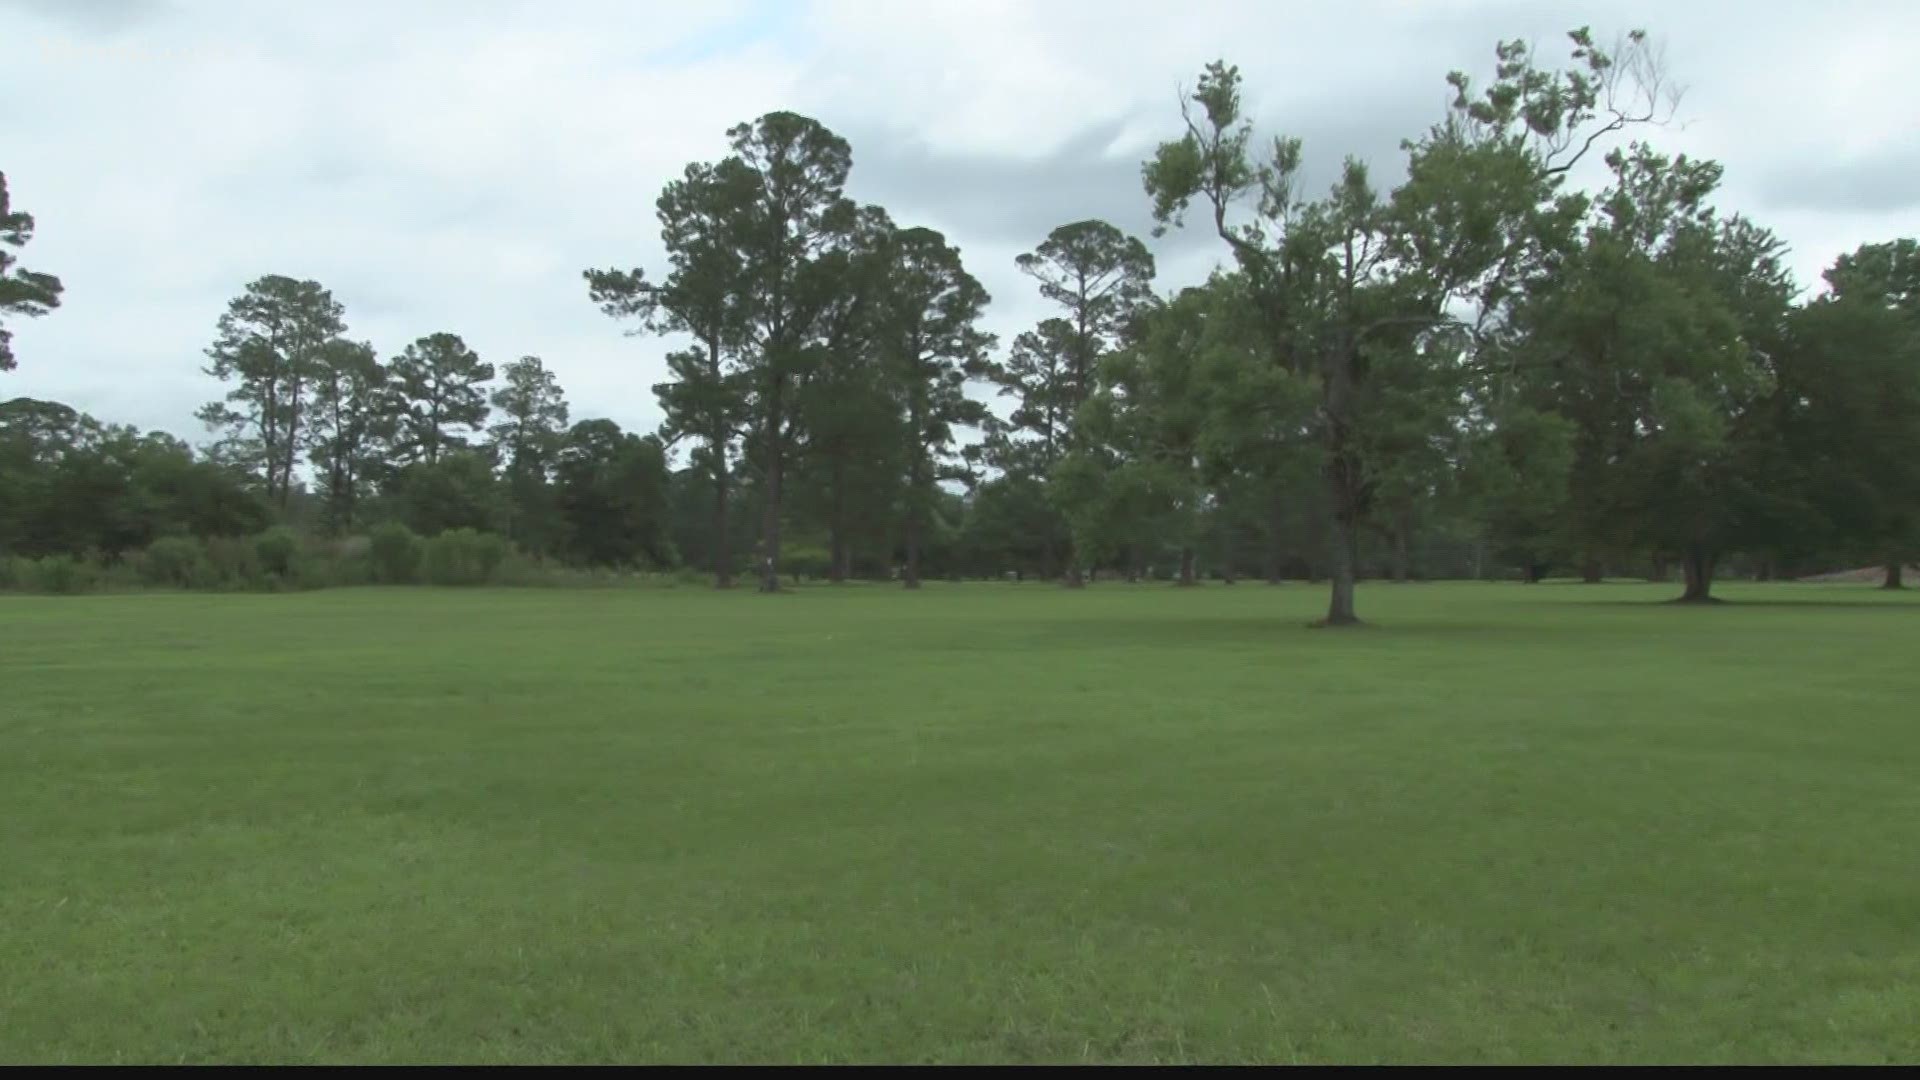 The City of Perry is asking people to come and offer suggestions on how the park can best serve the neighborhood Tuesday at 5 p.m.